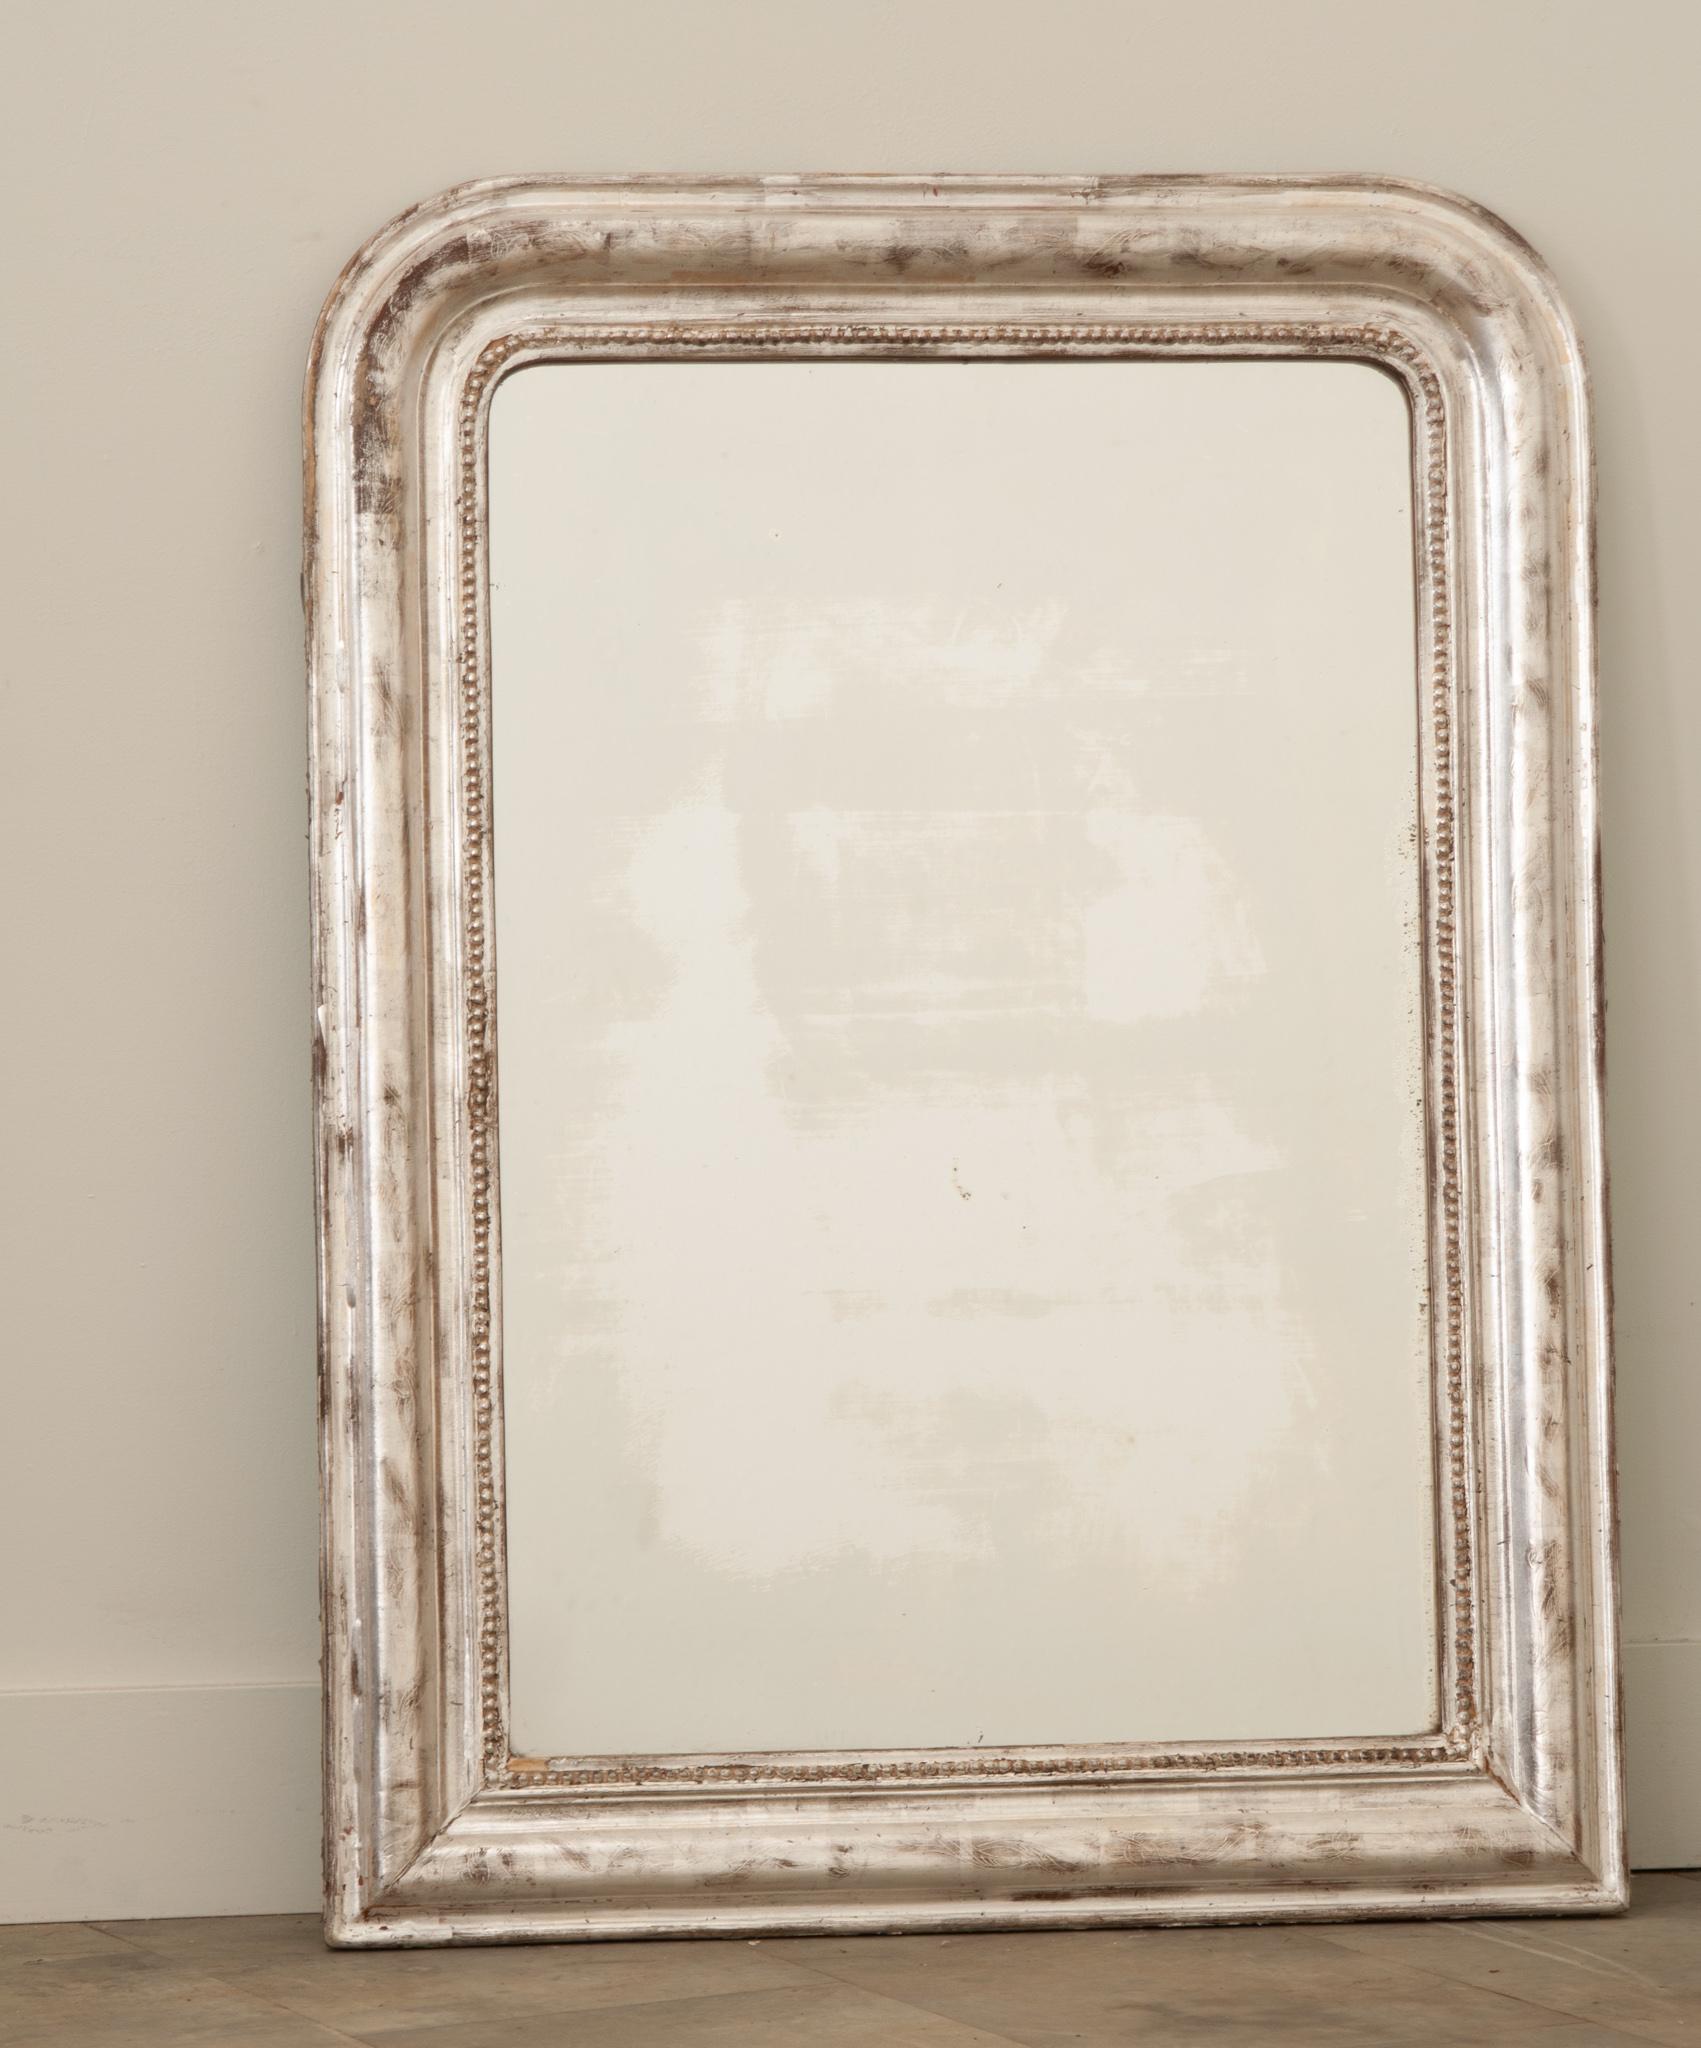 Hand-crafted in France in the 19th Century, this Louis Philippe antique mirror has traditional, timeless lines with rounded corners. The frame is decorated with a luxurious silver leaf finish over beautiful lightly engraved cascading leaf patterns,